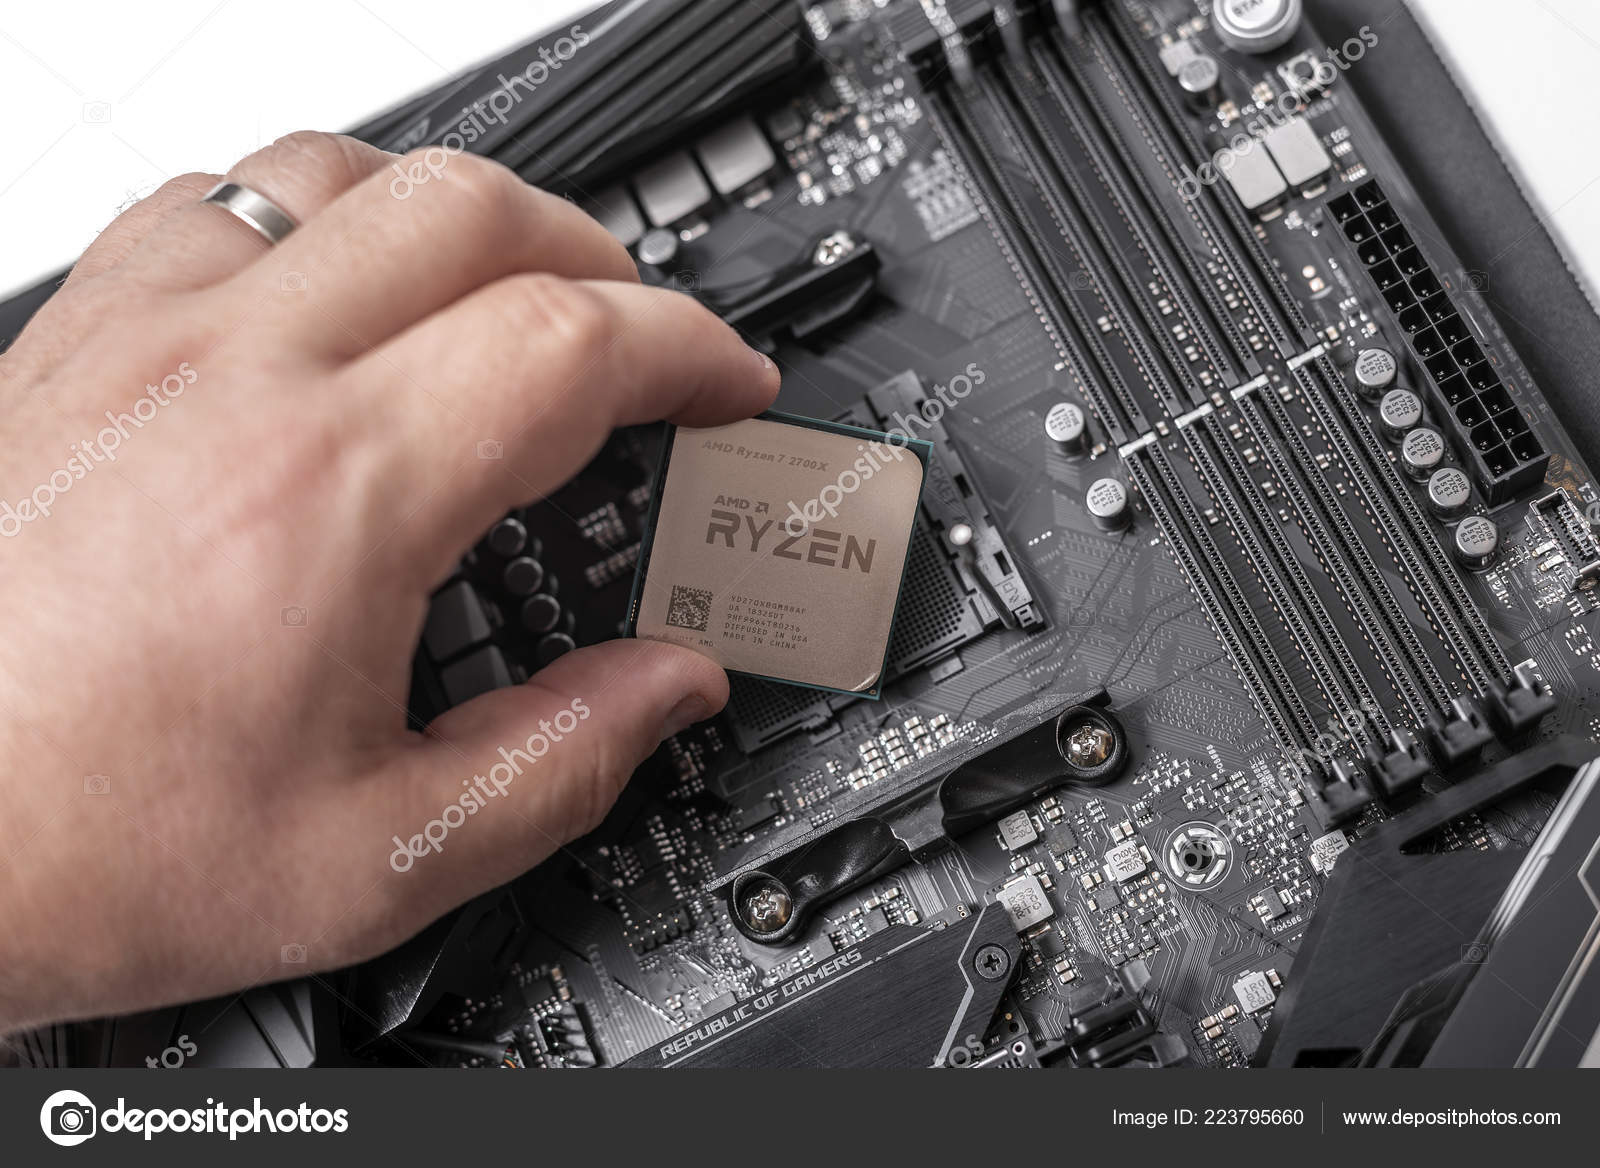 Processor Ryzen 7 2700X in hand against the background of a computer  motherboard. – Stock Editorial Photo © believeinme #223795660